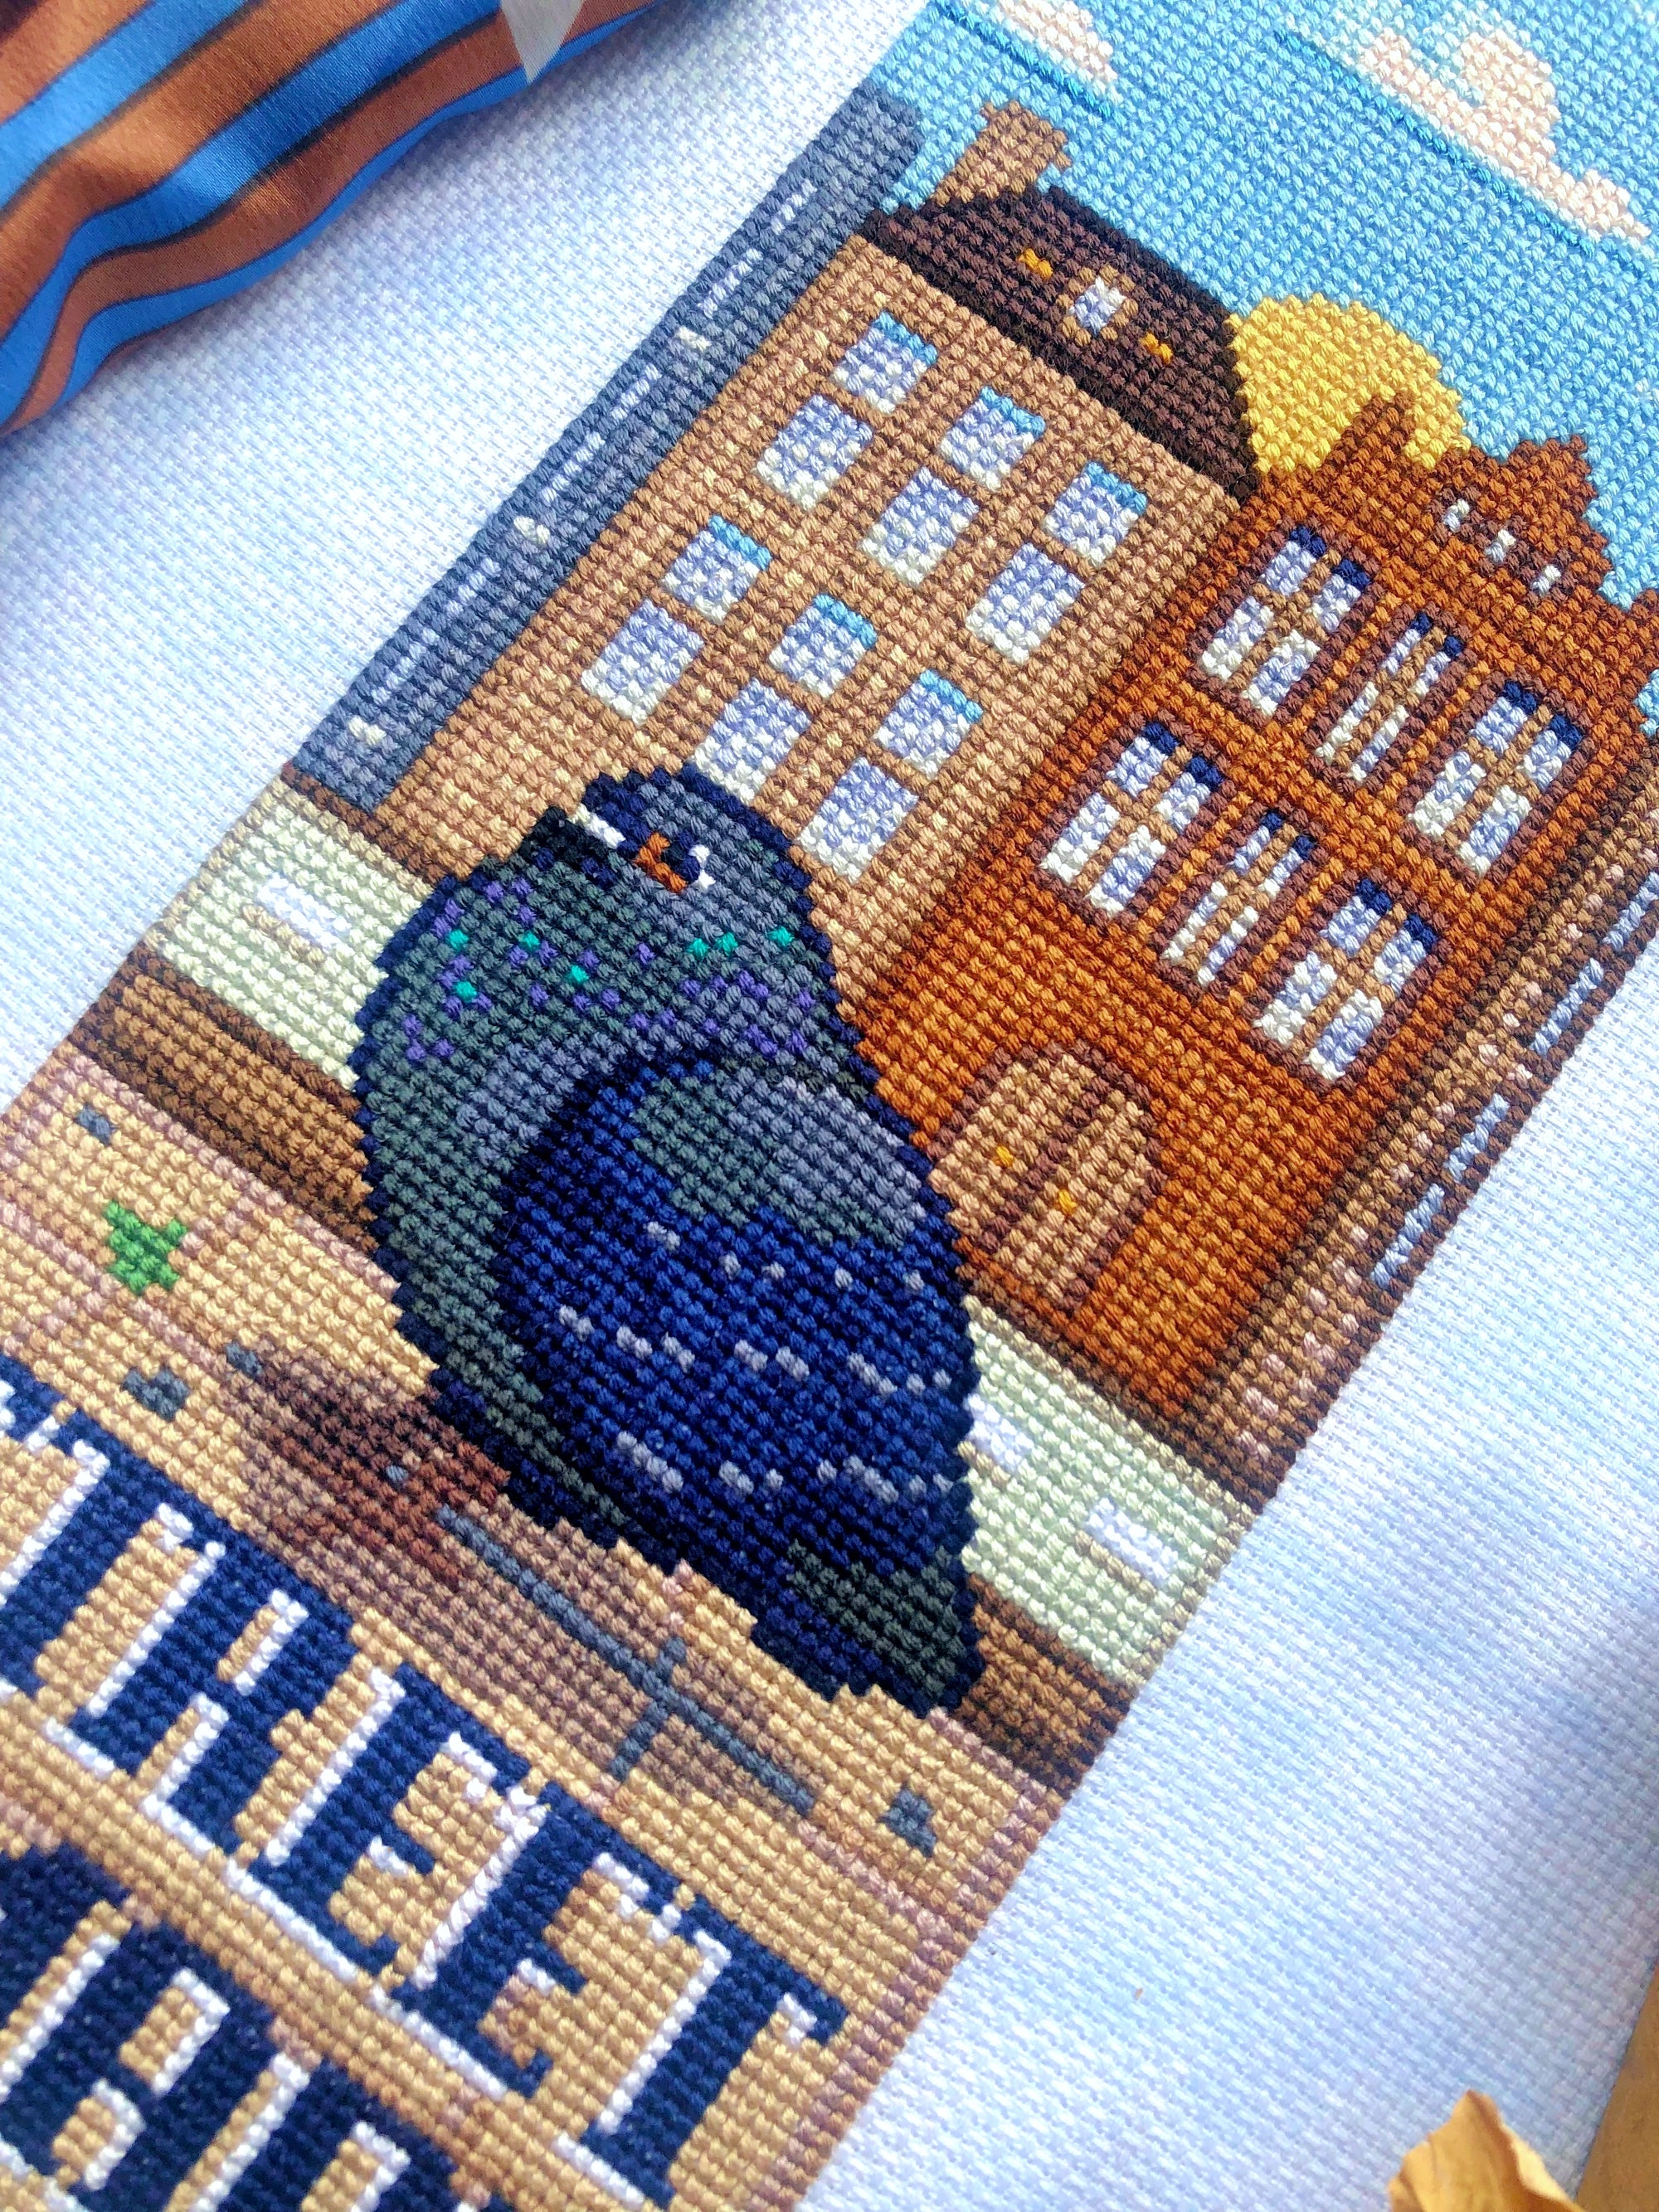 Closeup of pigeon Street Smart cross stitch pattern. Image is focused on pigeon. He is mostly blue and grey, with specks of teal and purple. The houses in the background are various shades of brown with blue windows and shutters. The sun is low.